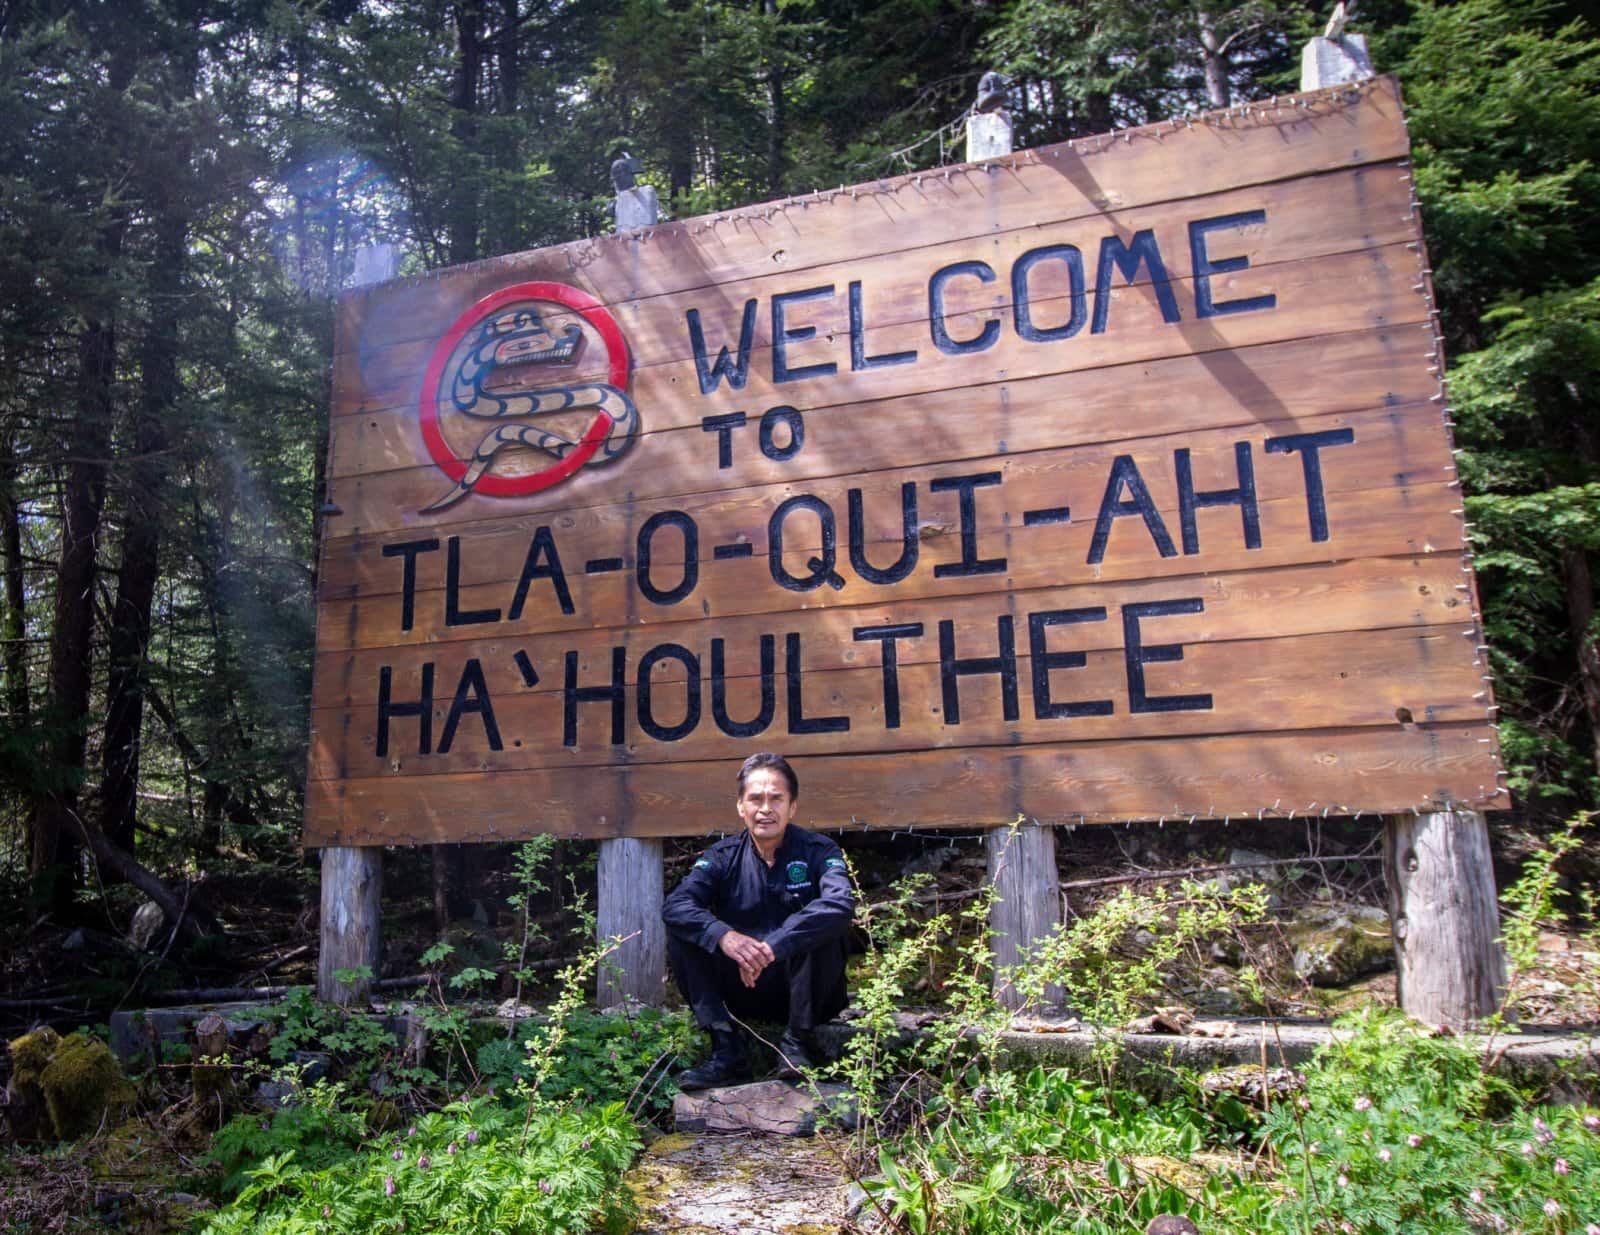 Tla-o-qui-aht master carver Joe Martin told the story of when Nuu-chah-nulth people five generations back quarantined in a cave in a river valley in their territory, to survive the smallpox pandemic of the time. Photo by Emilee Gilpin